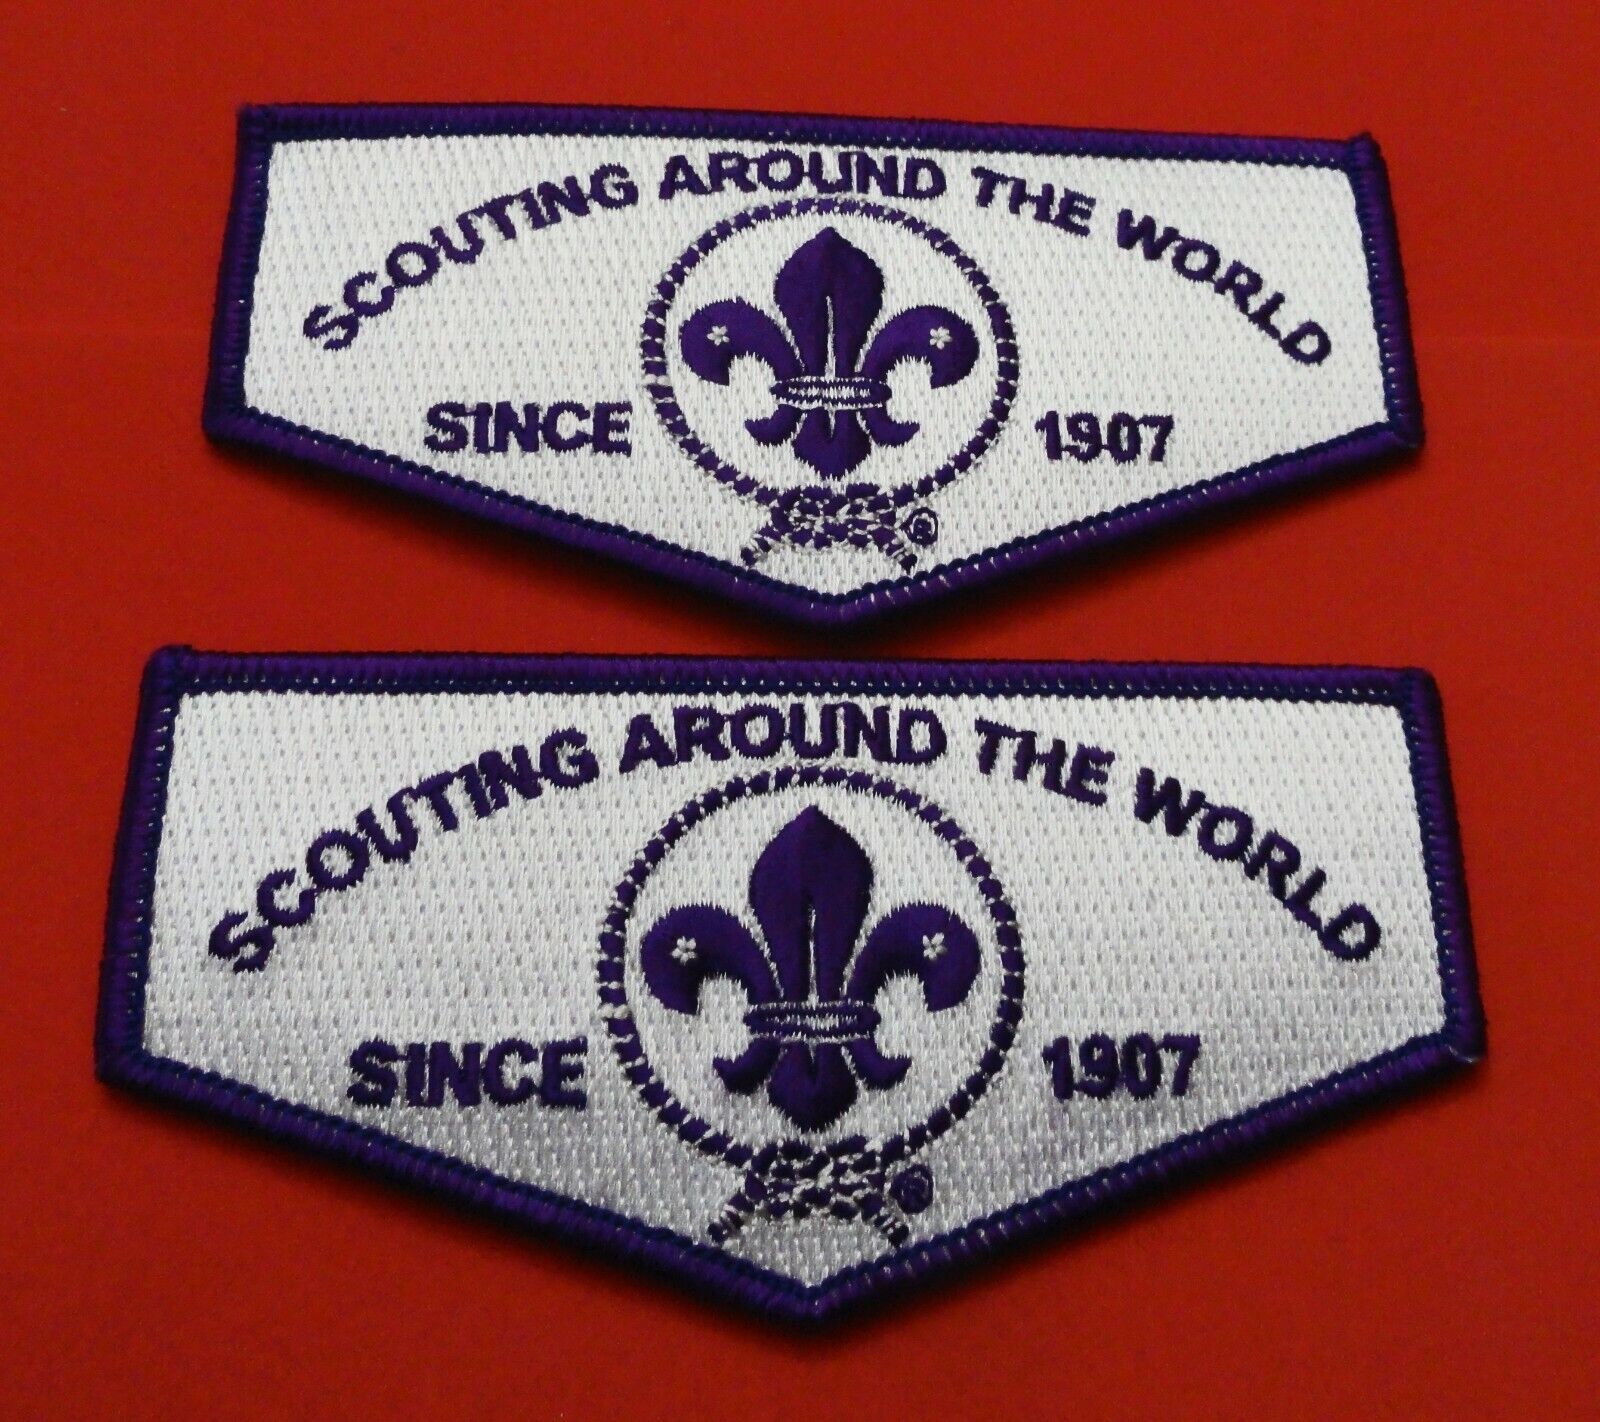 TWO World Scouting Crest Flaps: Purple Border - Since 1907